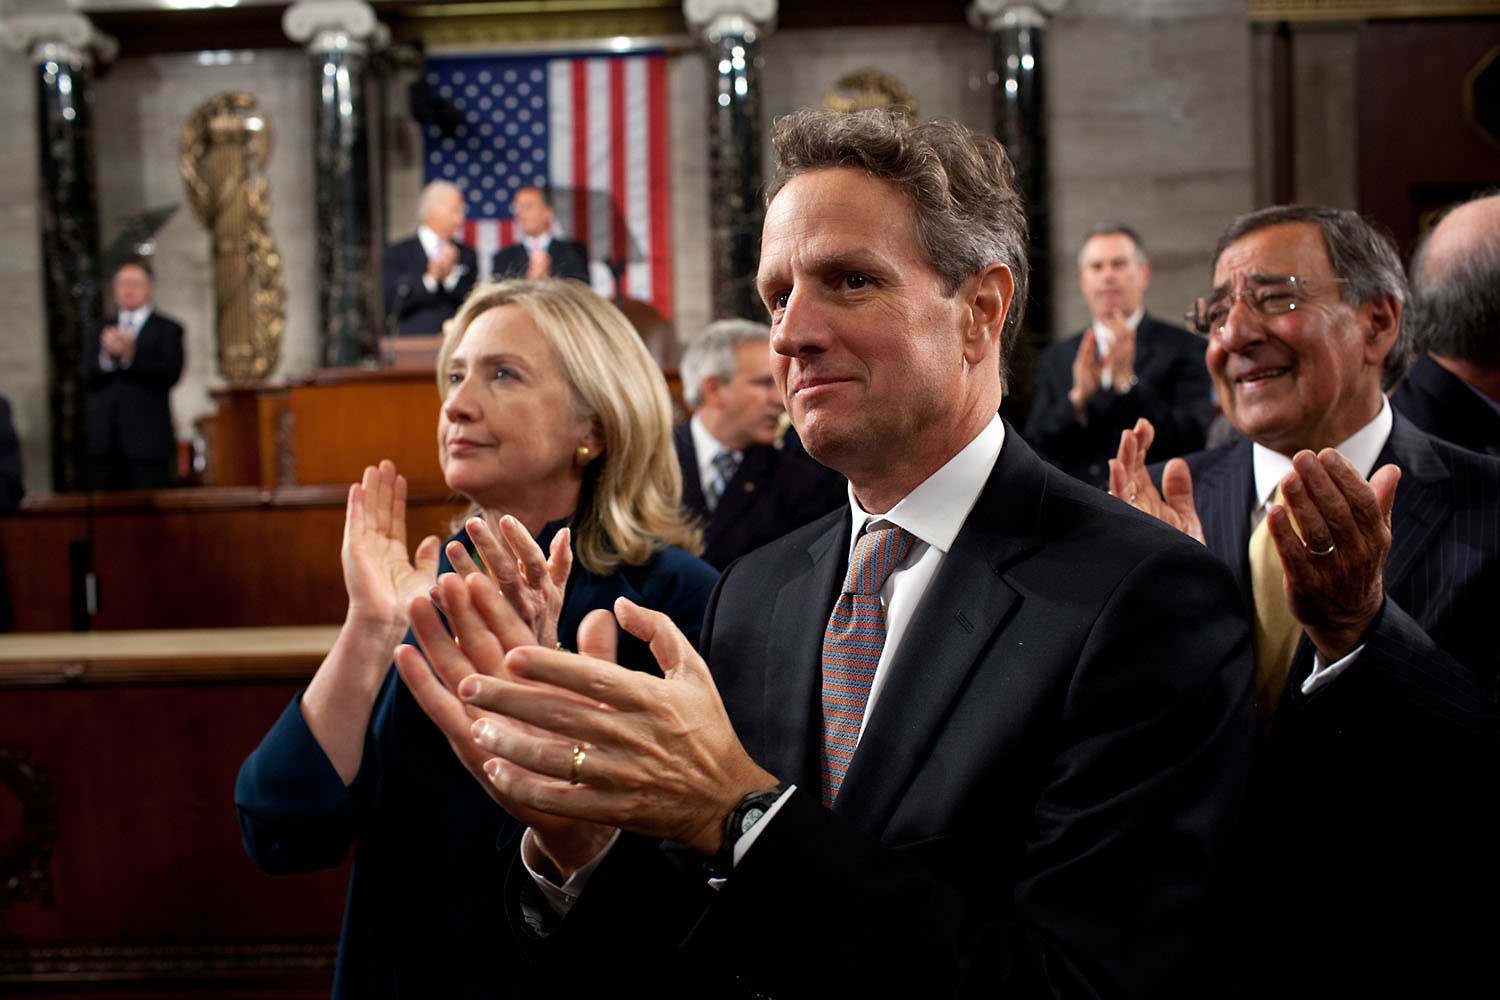 Cabinet Secretaries Hillary Clinton, Tim Geithner and Leon Panetta applaud as President Obama is escorted into the House Chamber of the United States Capitol, prior to addressing a Joint Session of Congress on jobs and the economy, and to outline the details of the American Jobs Act, at the U.S. Capitol, Washington, D.C., Sept. 8, 2011.